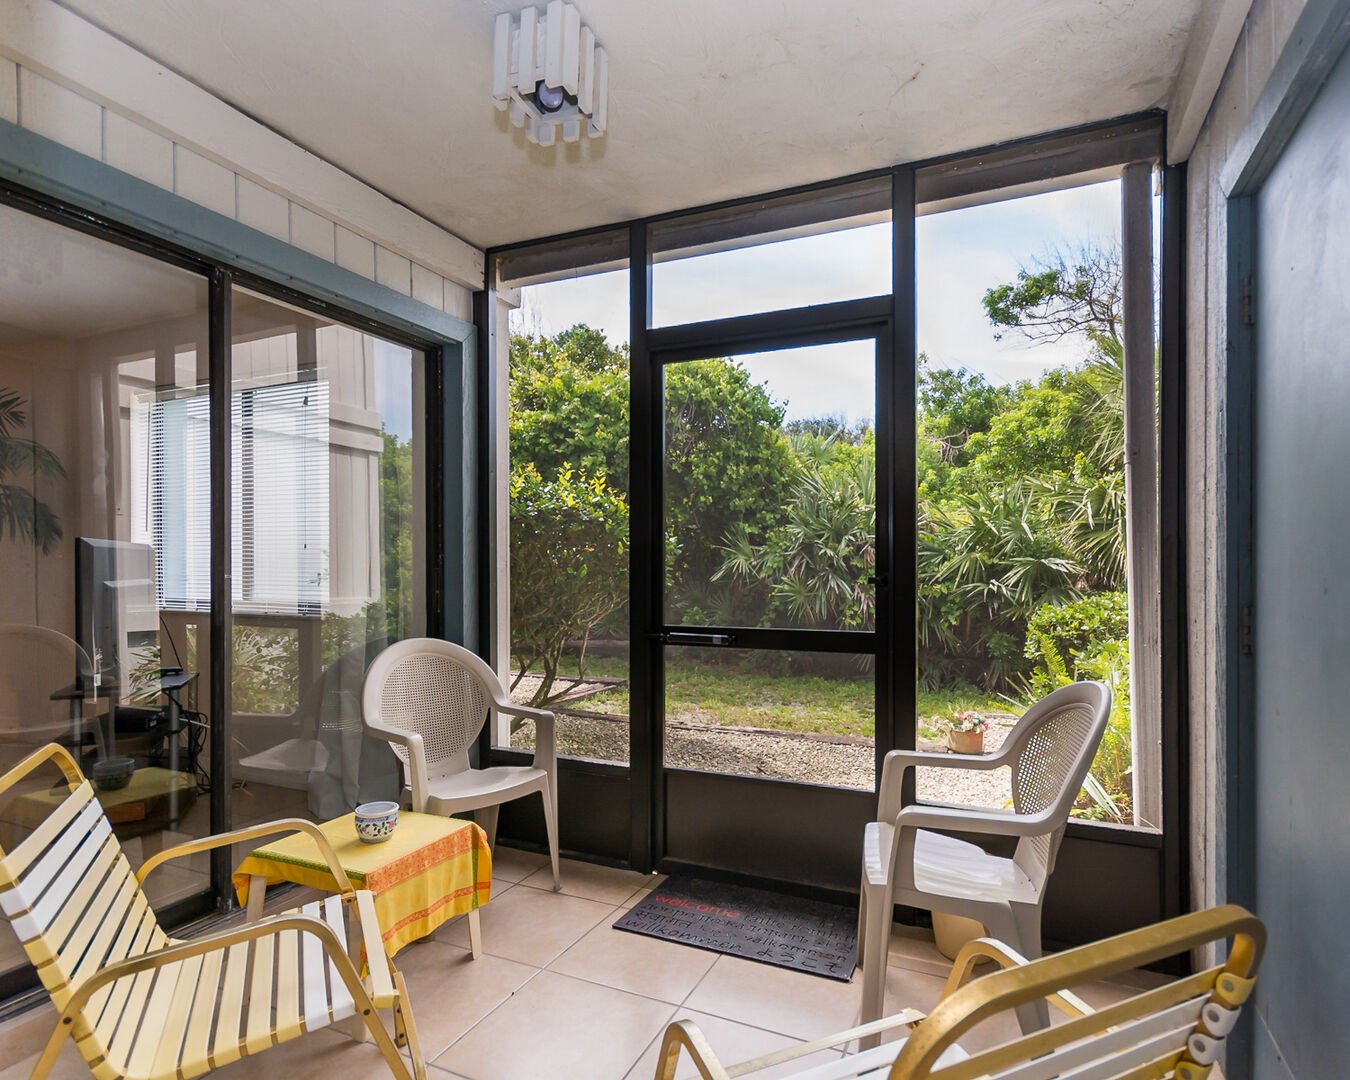 This New Smyrna Beach vacation rental also has a screen in porch!